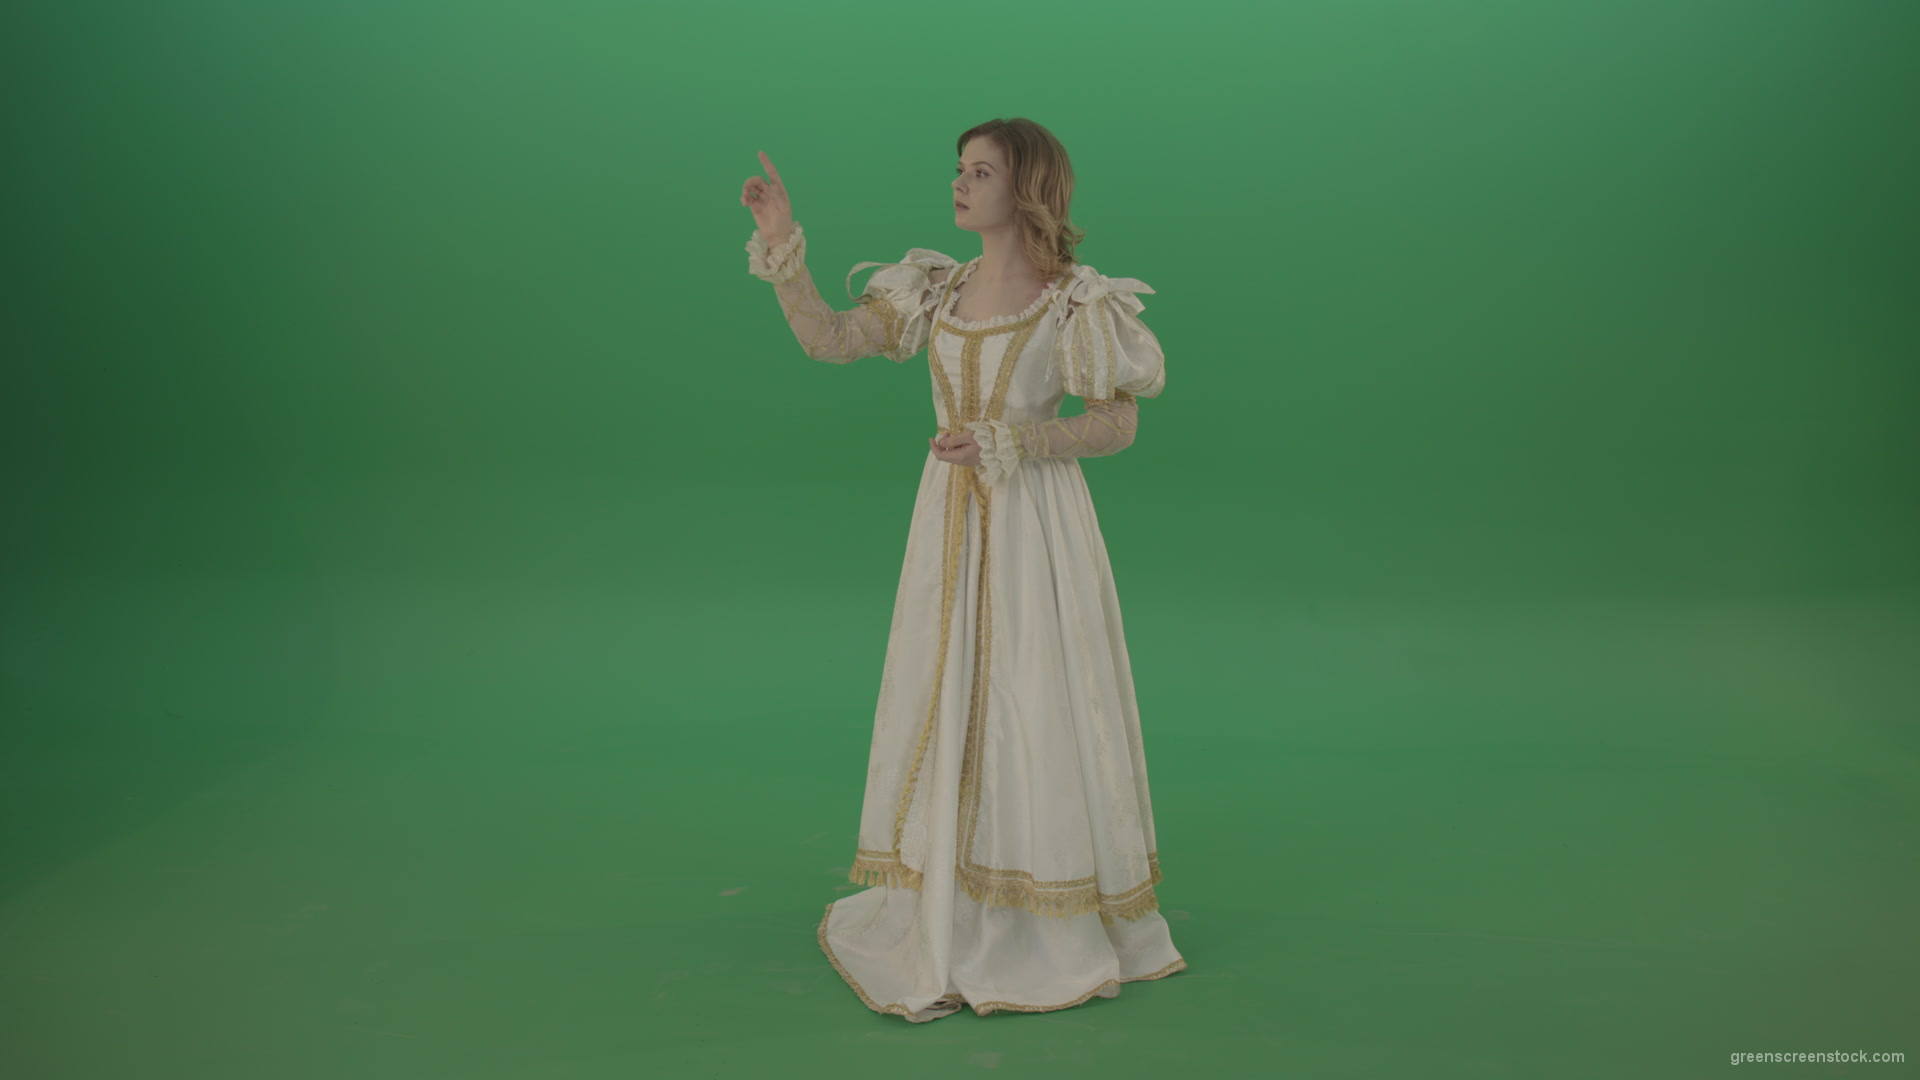 Flips-the-touchscreen-princess-in-a-white-dress-isolated-on-green-screen_002 Green Screen Stock